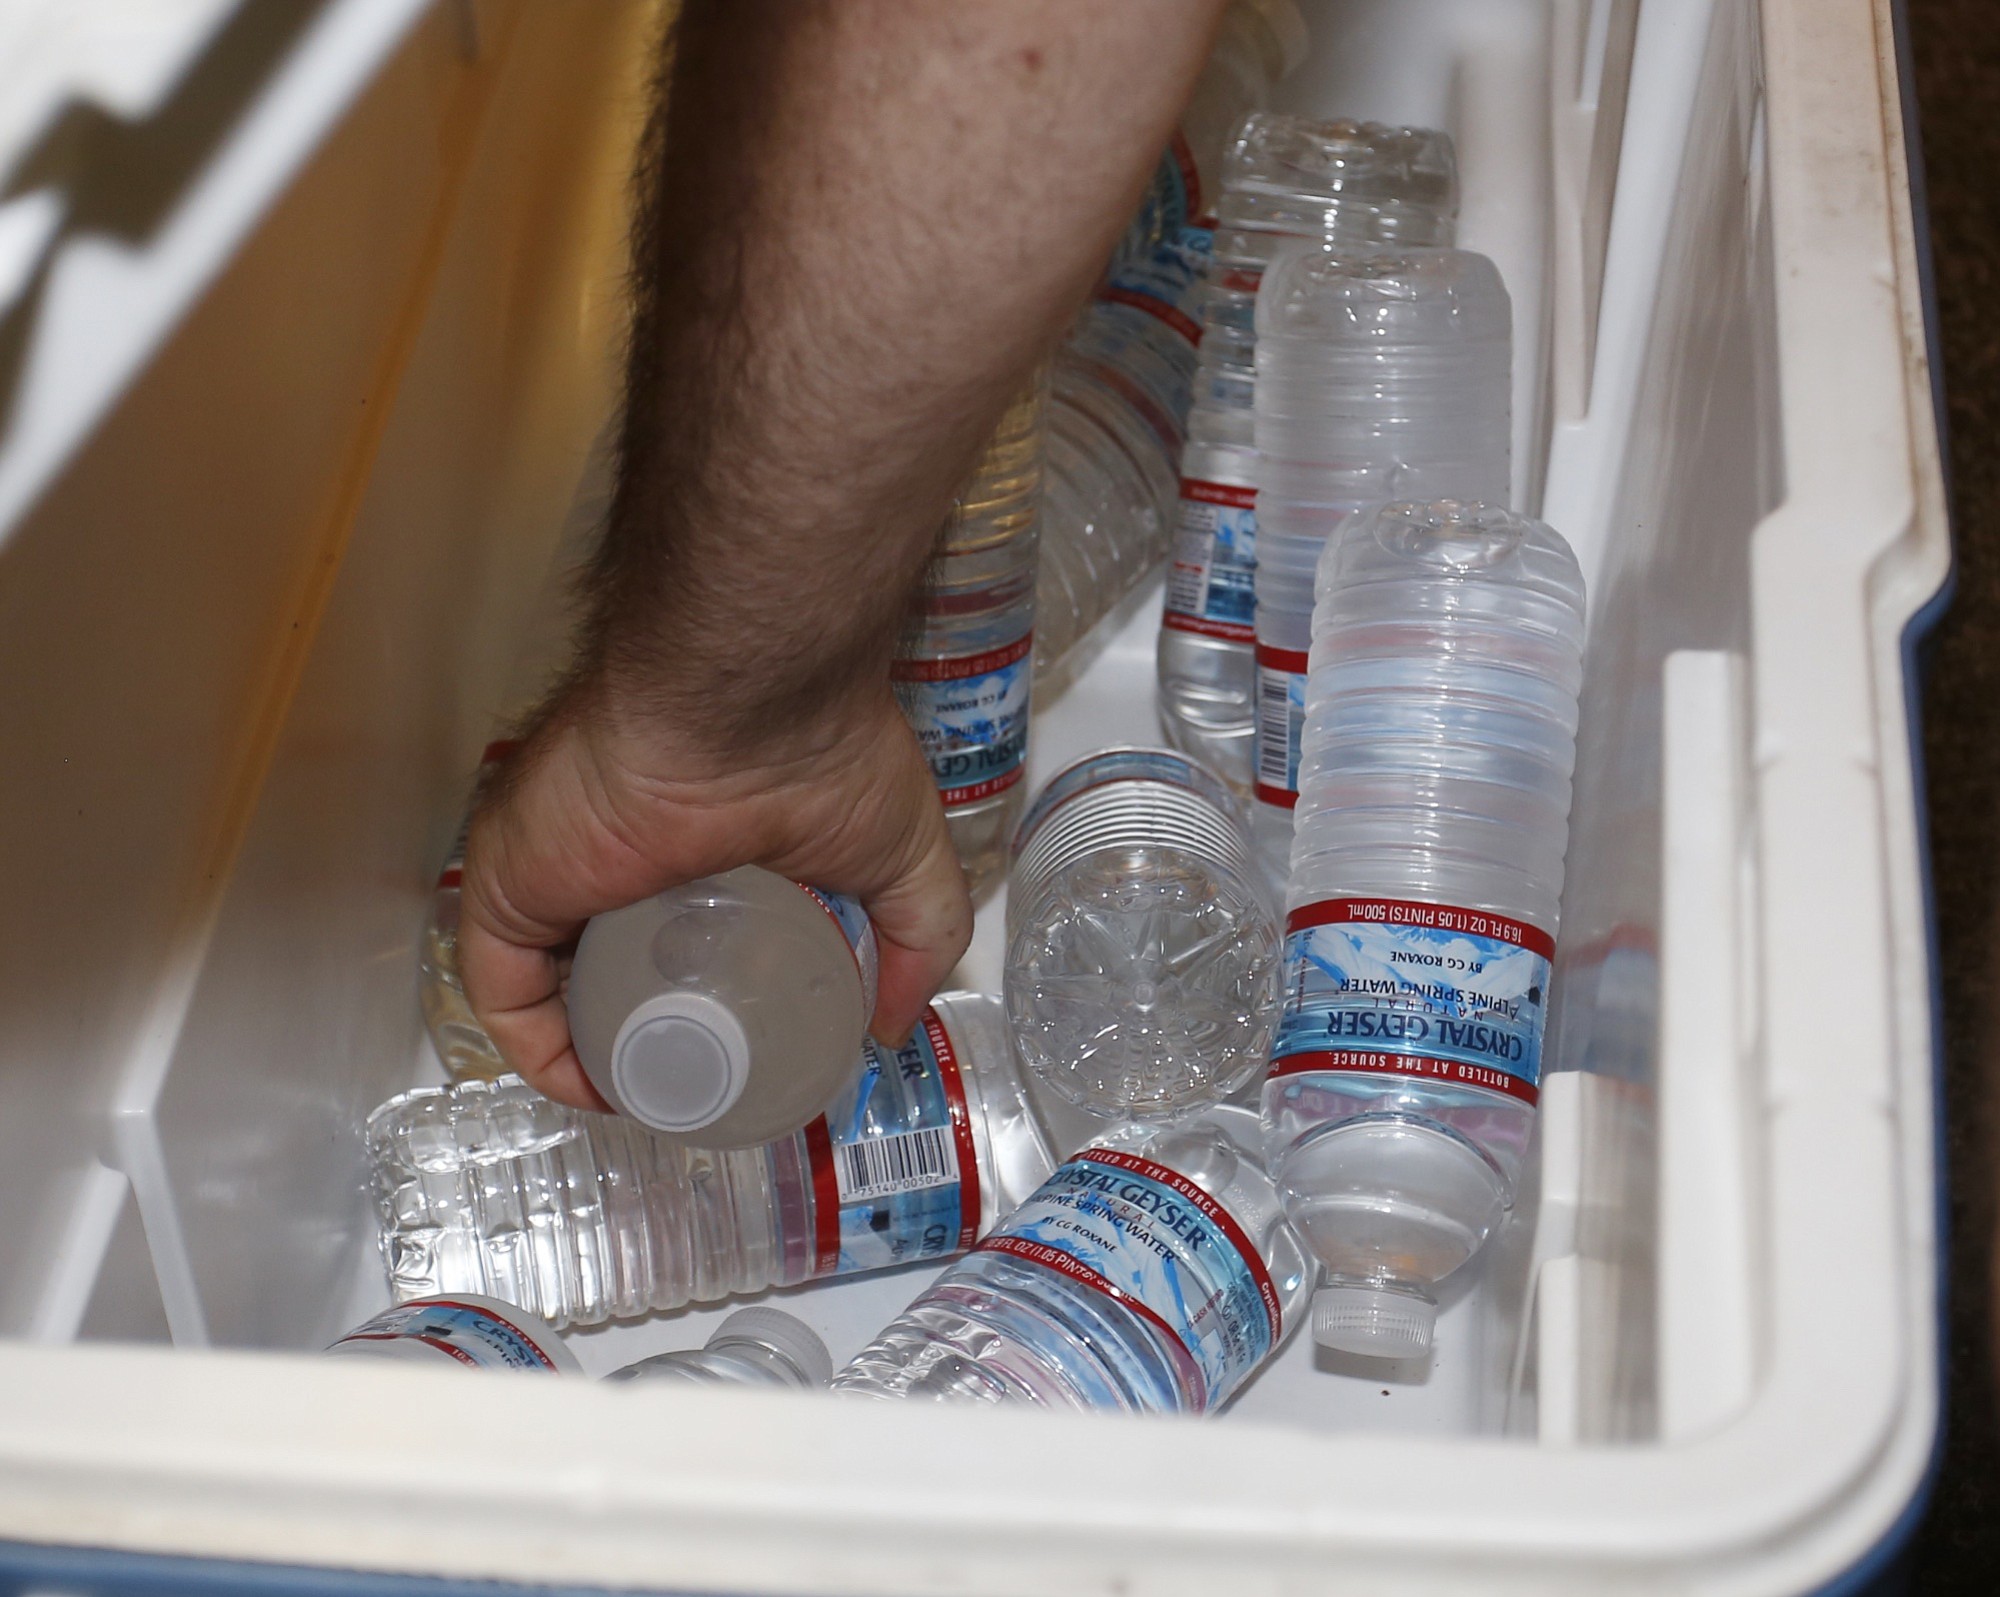 Concerned about people living on the streets during the heat wave, Share is trying to get bottled water to as many people as they can to stave off heat-related illness.